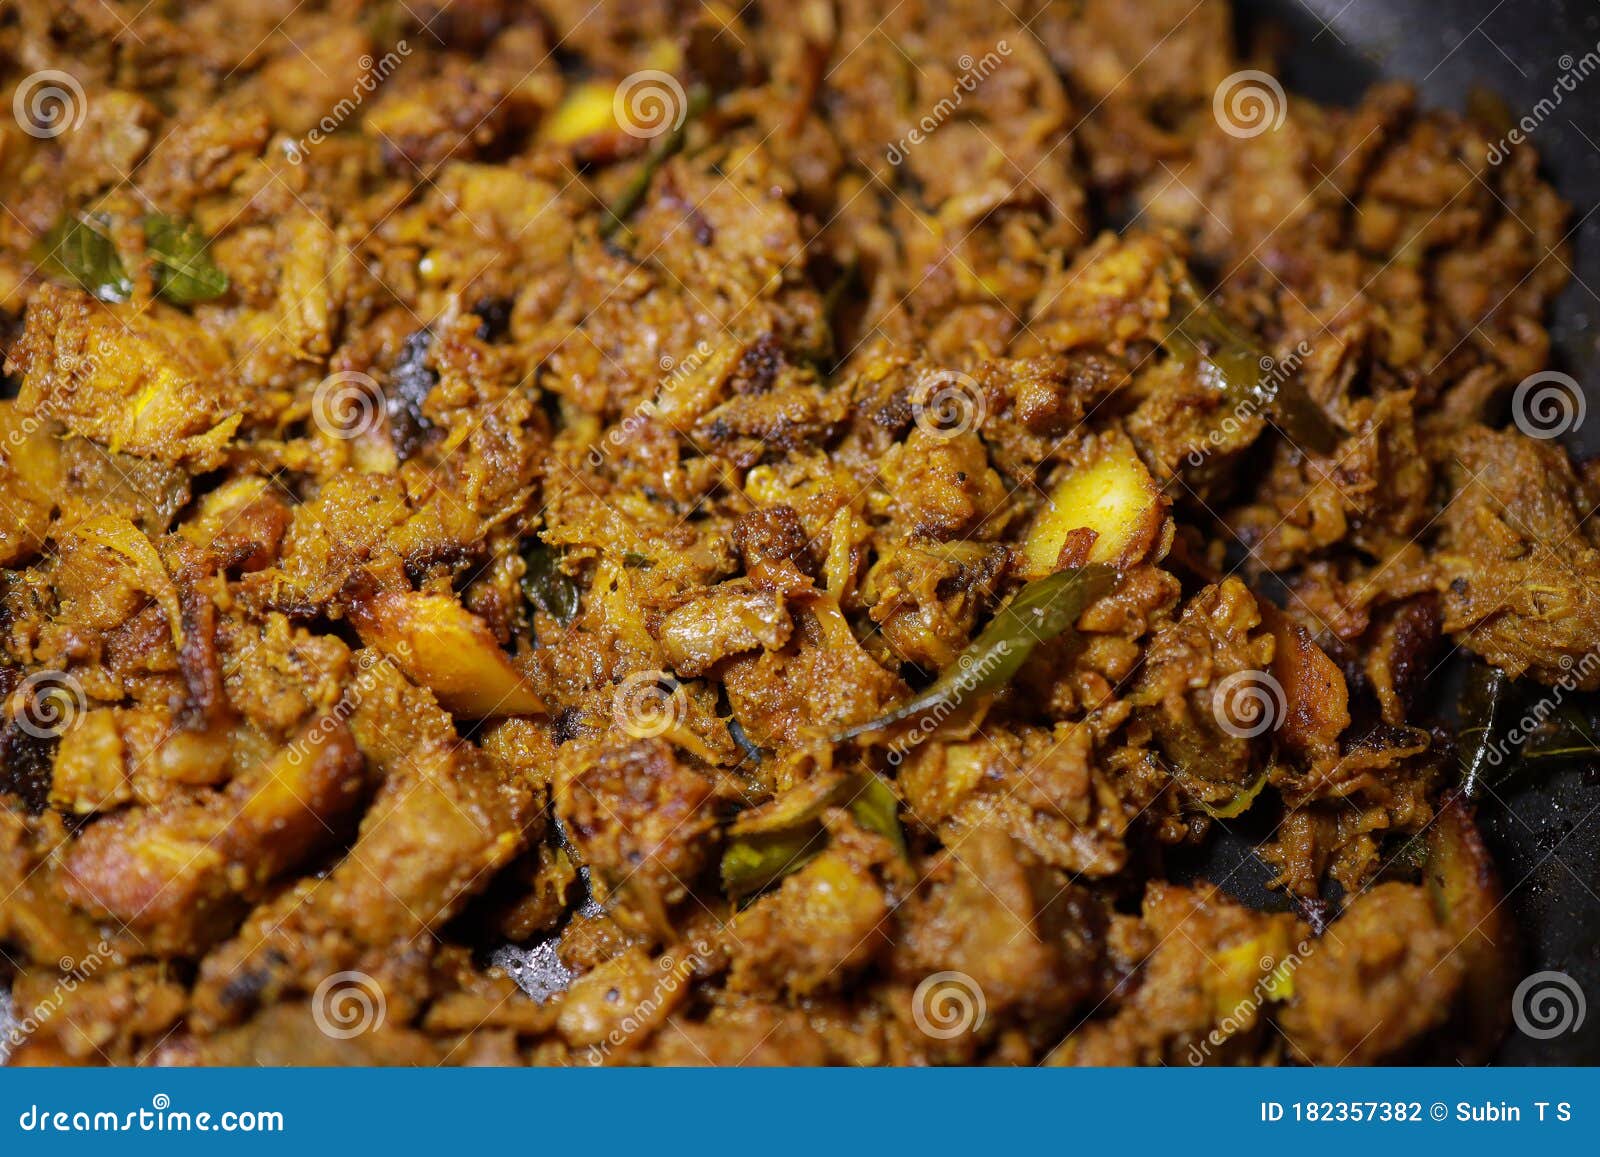 South Indian Dish Spicy Beef Fry Kerala, India. Side Dish Ghee Rice